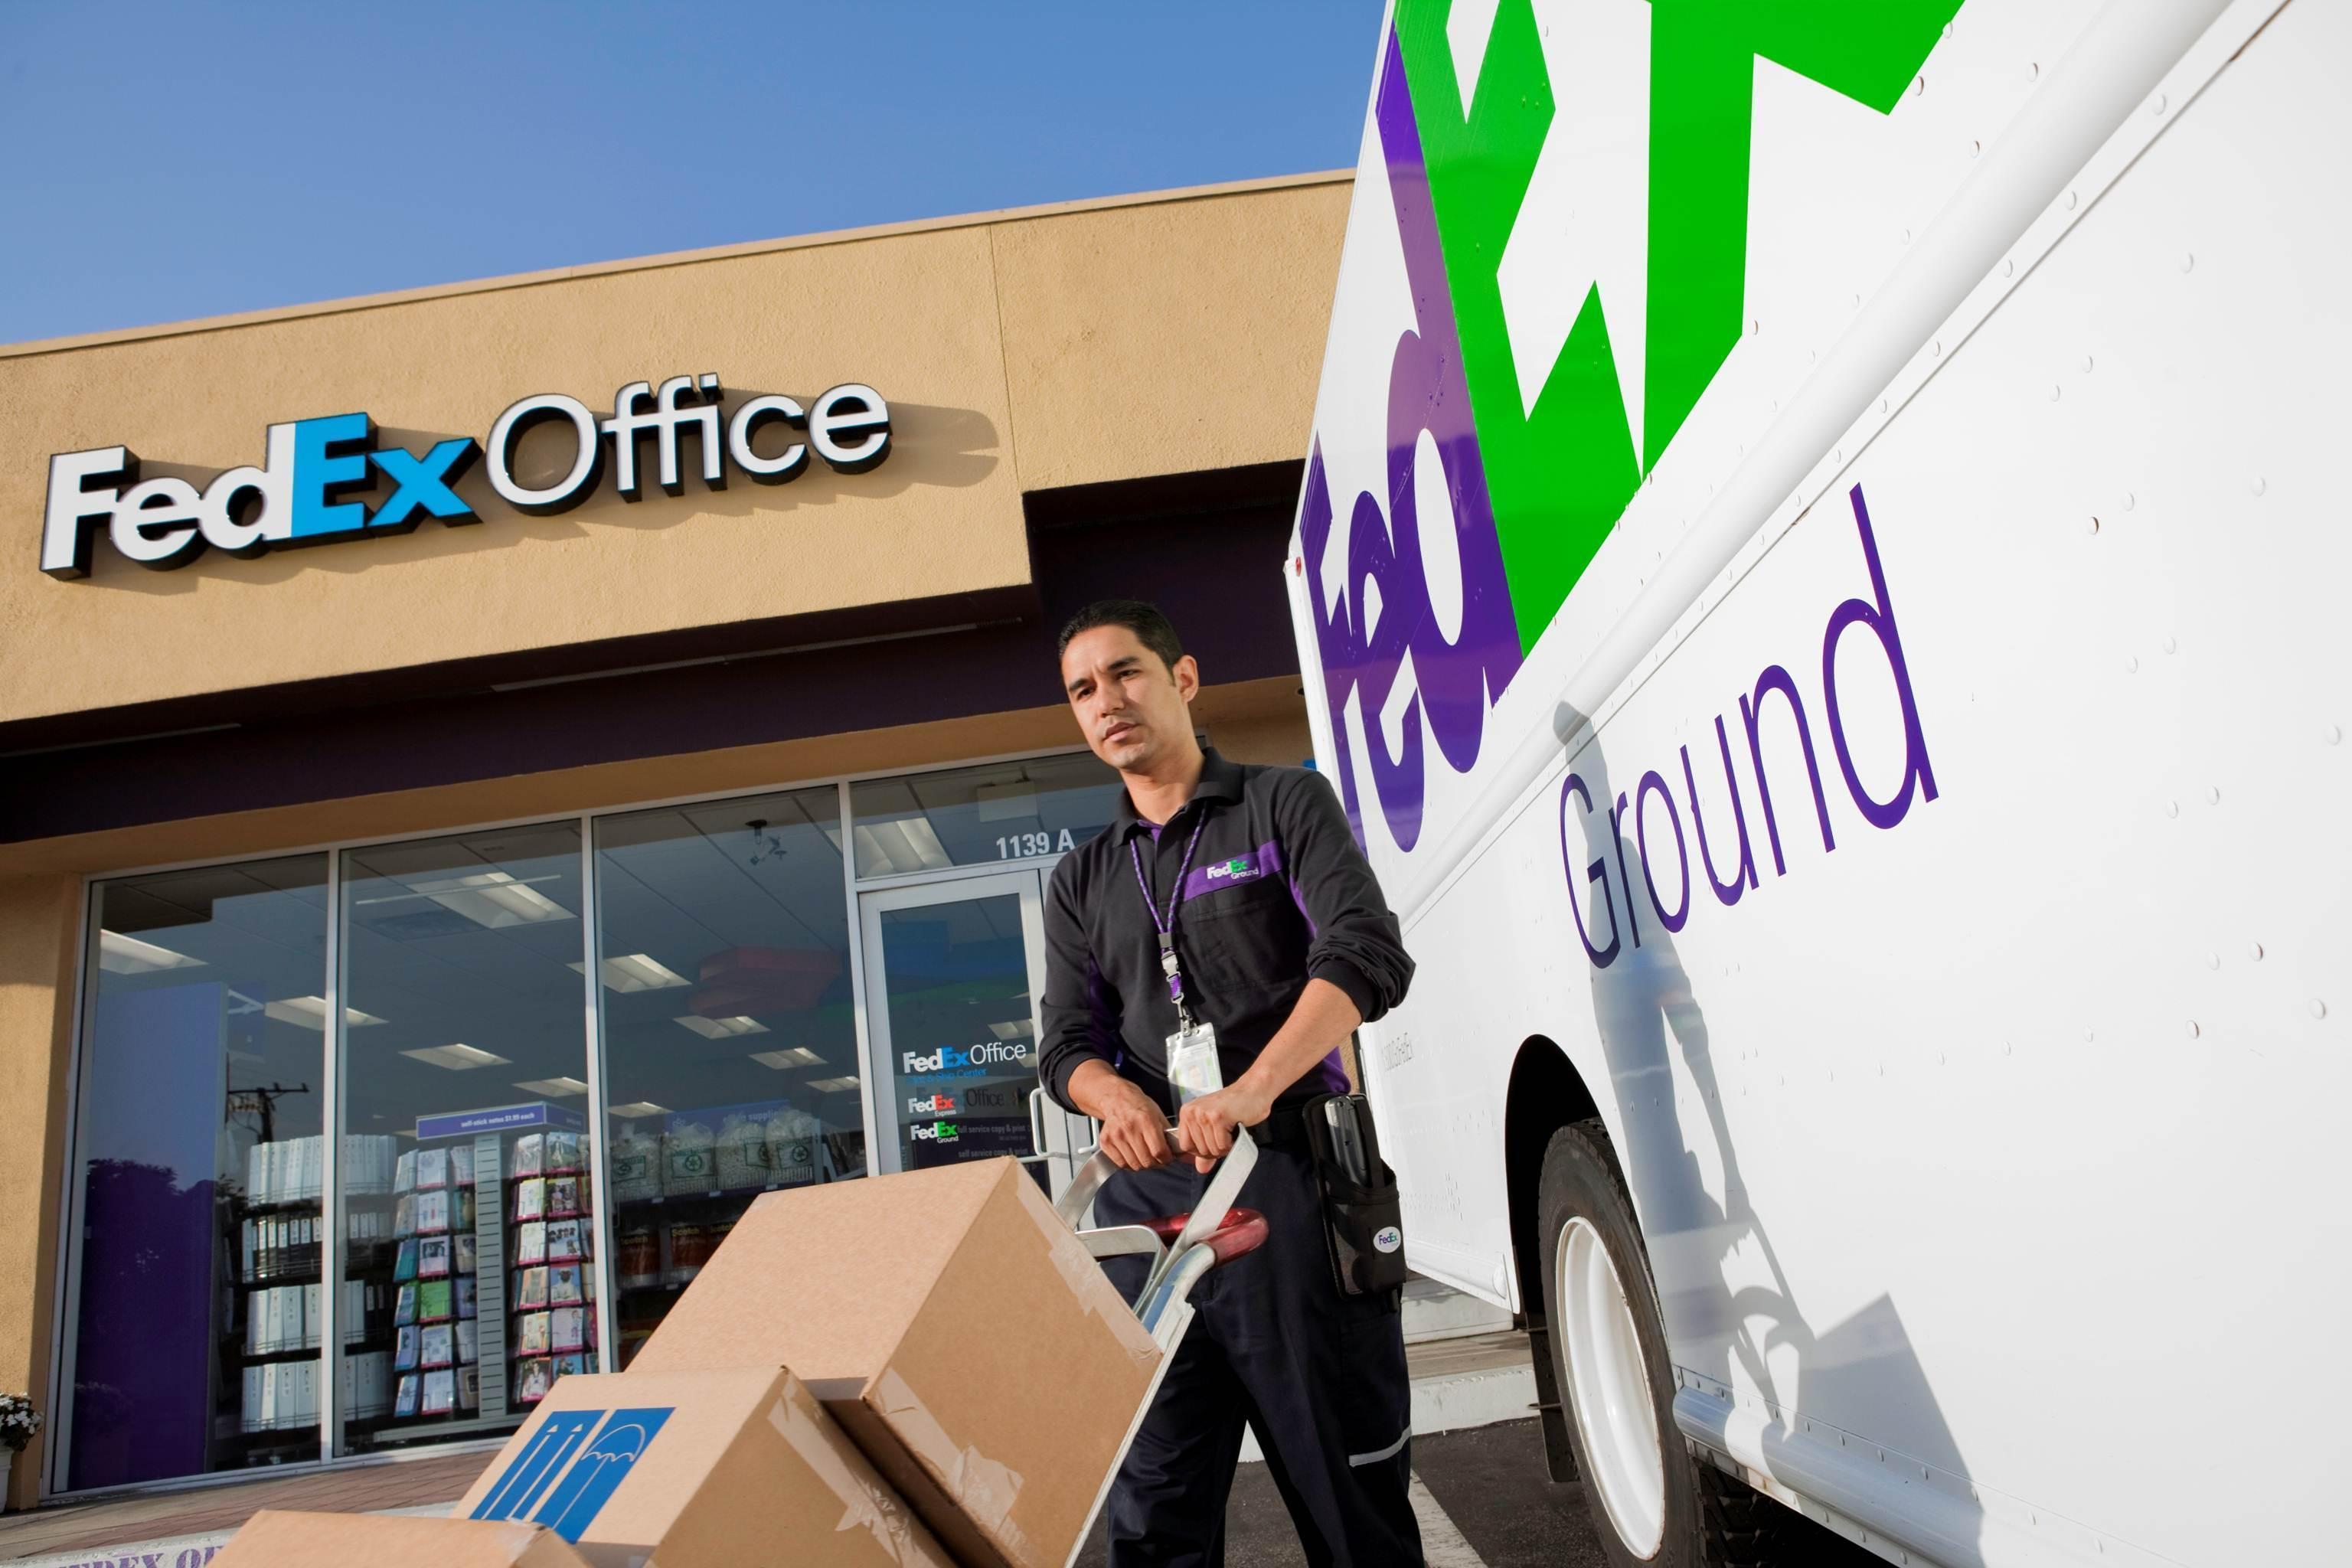 FedEx Office Print and Ship Center